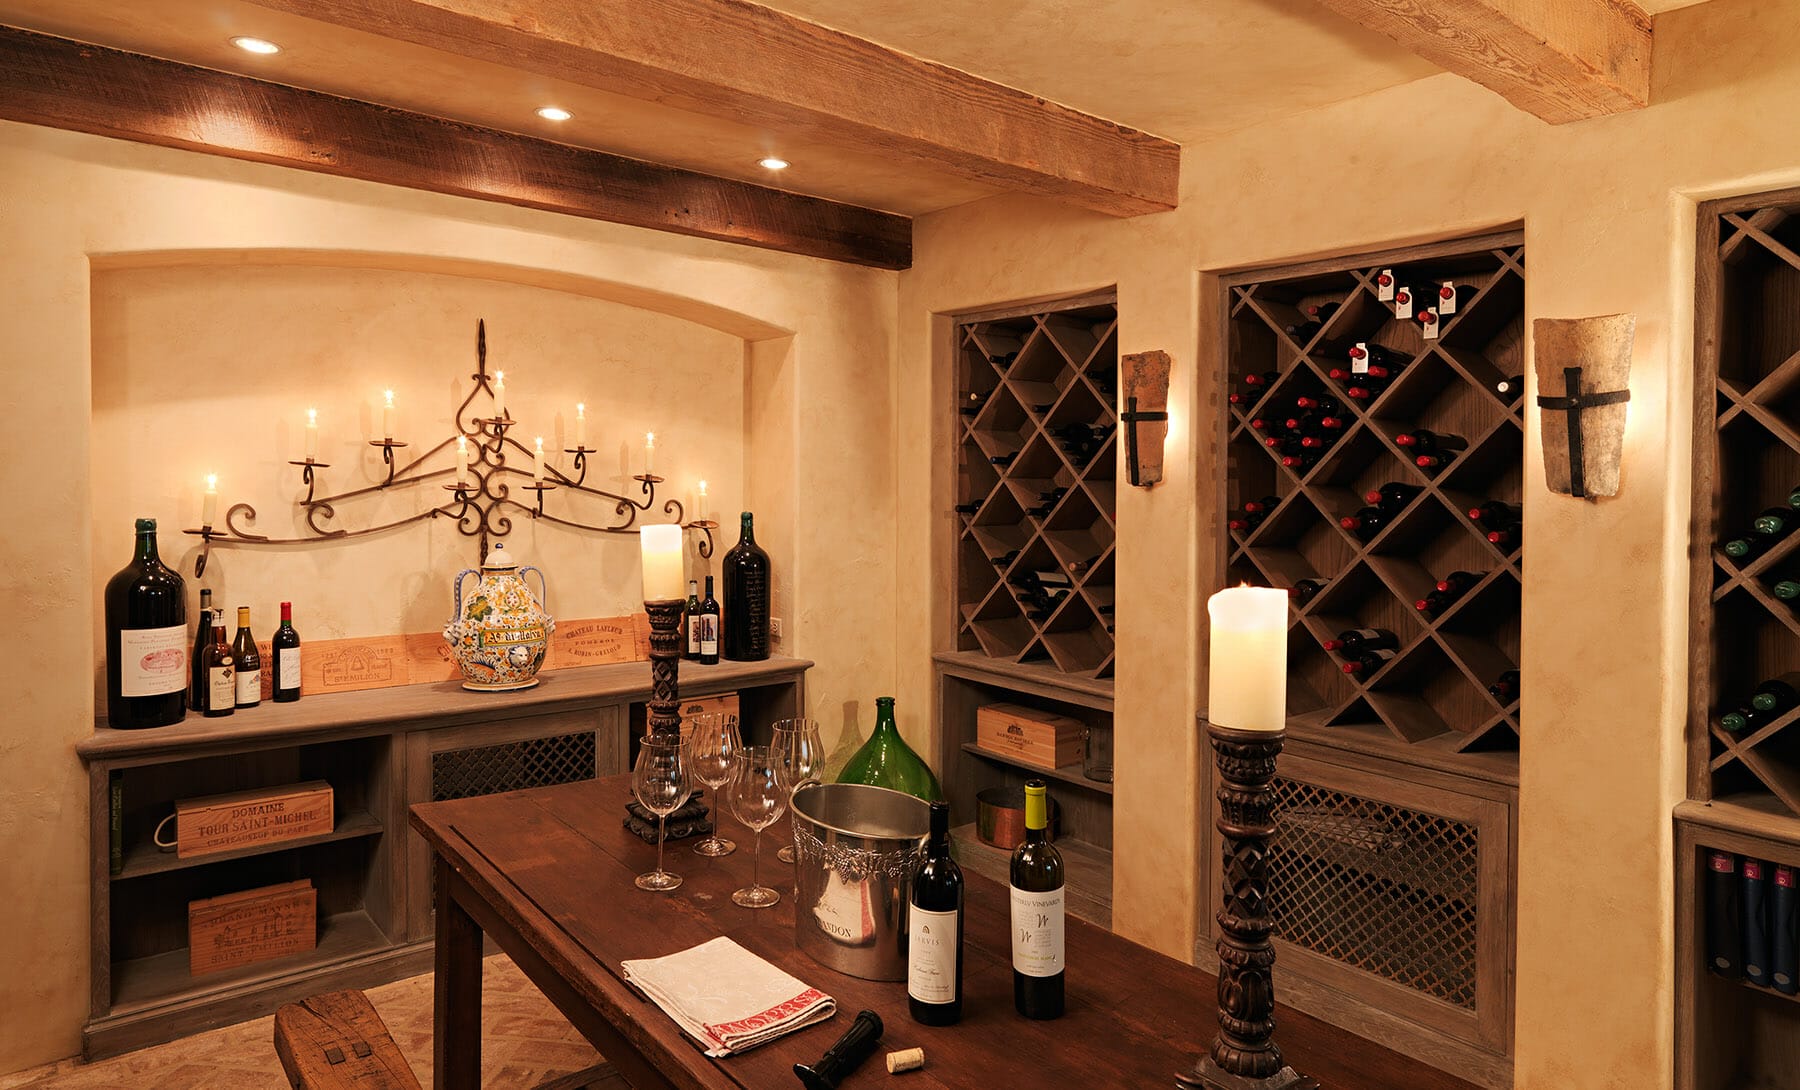 Wine cellar in a home in Albemarle county, designed by Gibson, Magerfield & Edenali Builders.